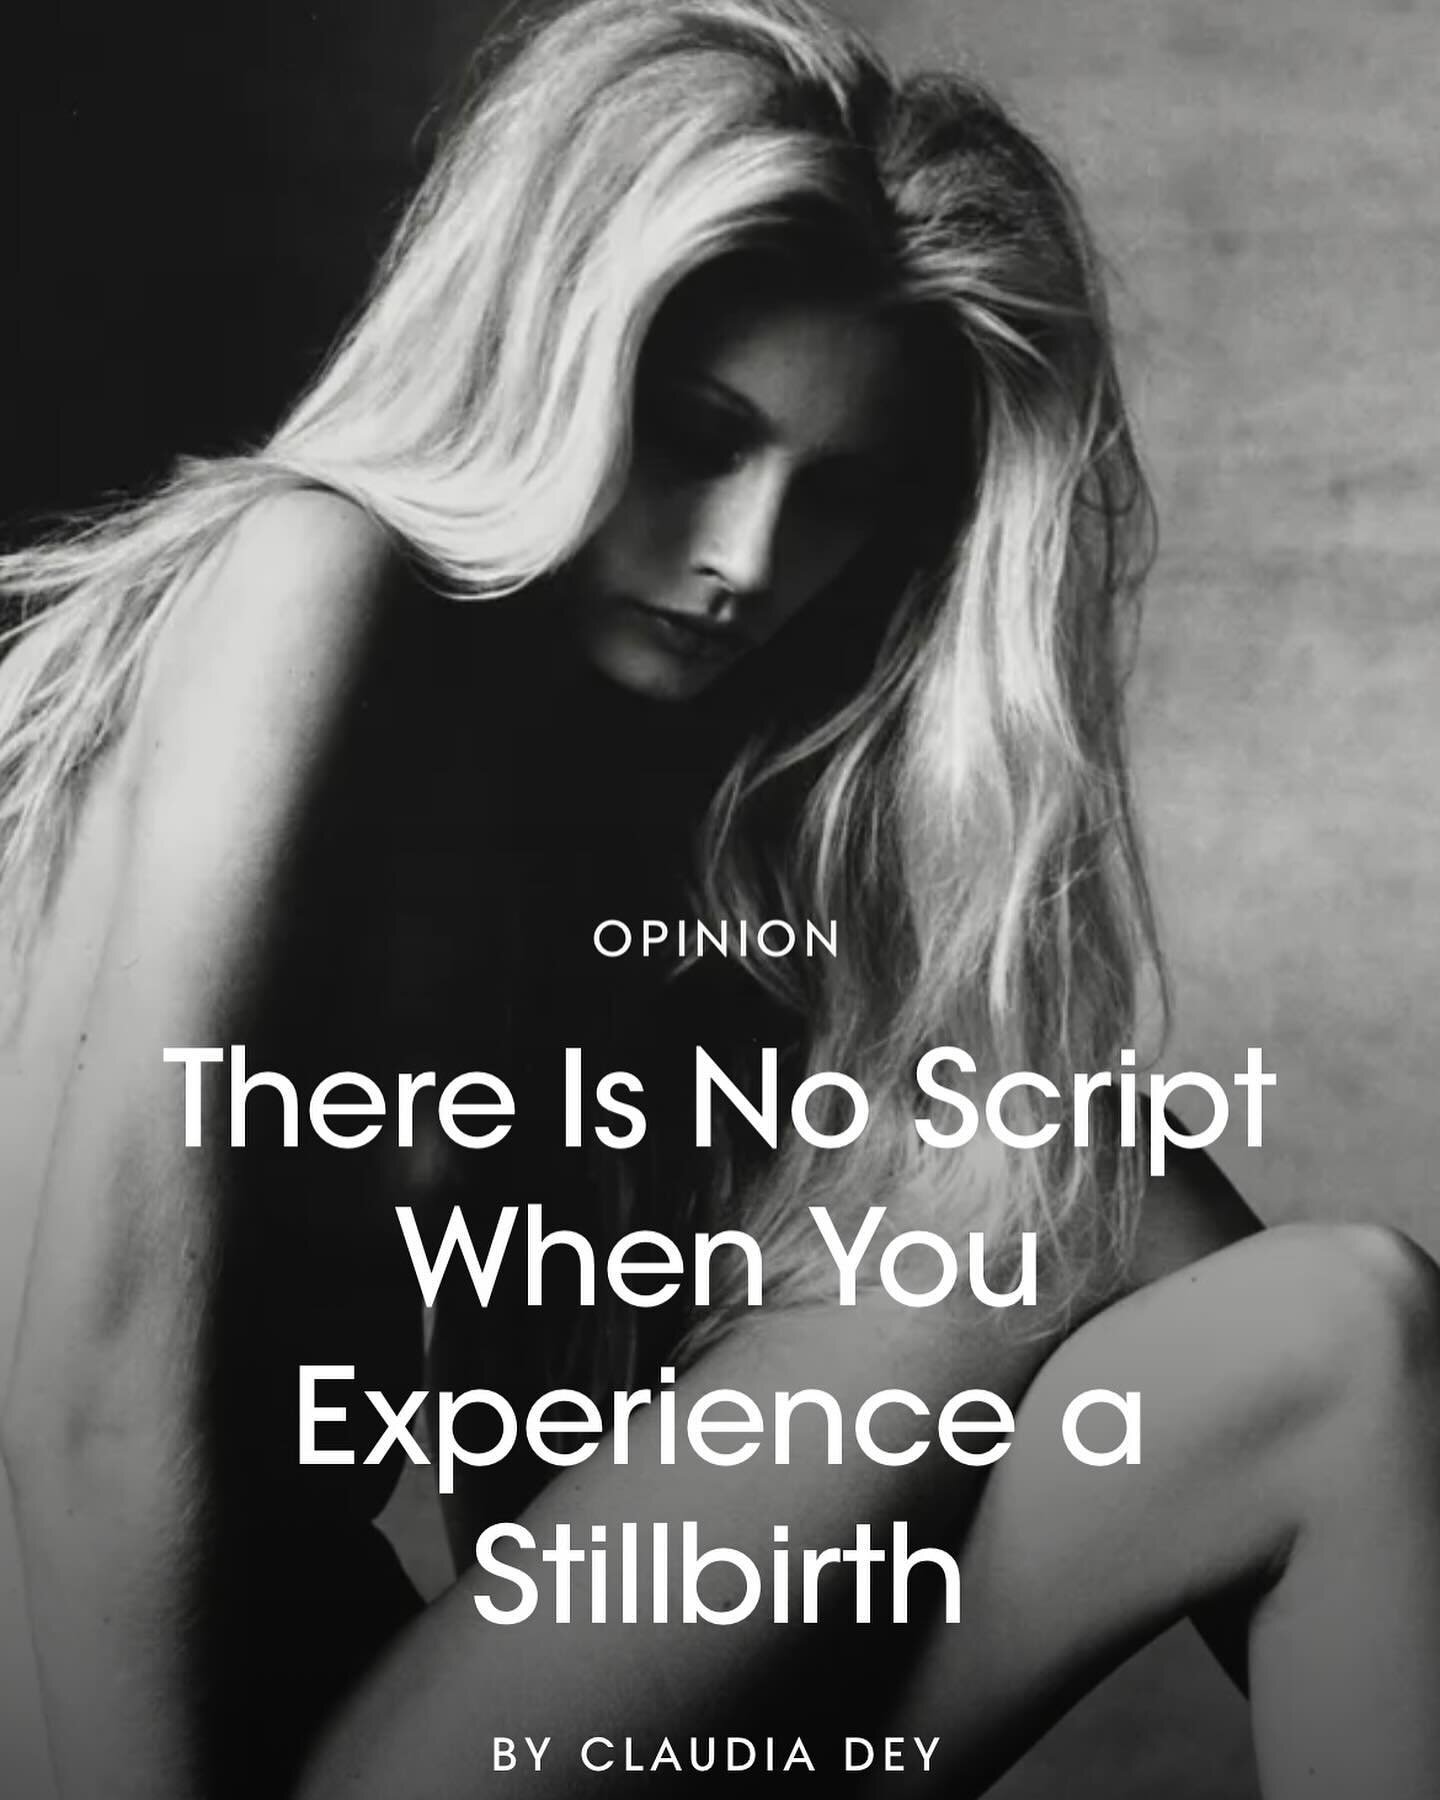 My new essay for @voguemagazine. TW: This piece deals with pregnancy loss, take care while reading.

&ldquo;There Is No Script When You Experience a Stillbirth&rdquo; is my sequel to my @parisreview essay, &ldquo;Mothers As Makers Of Death.&rdquo; Ra